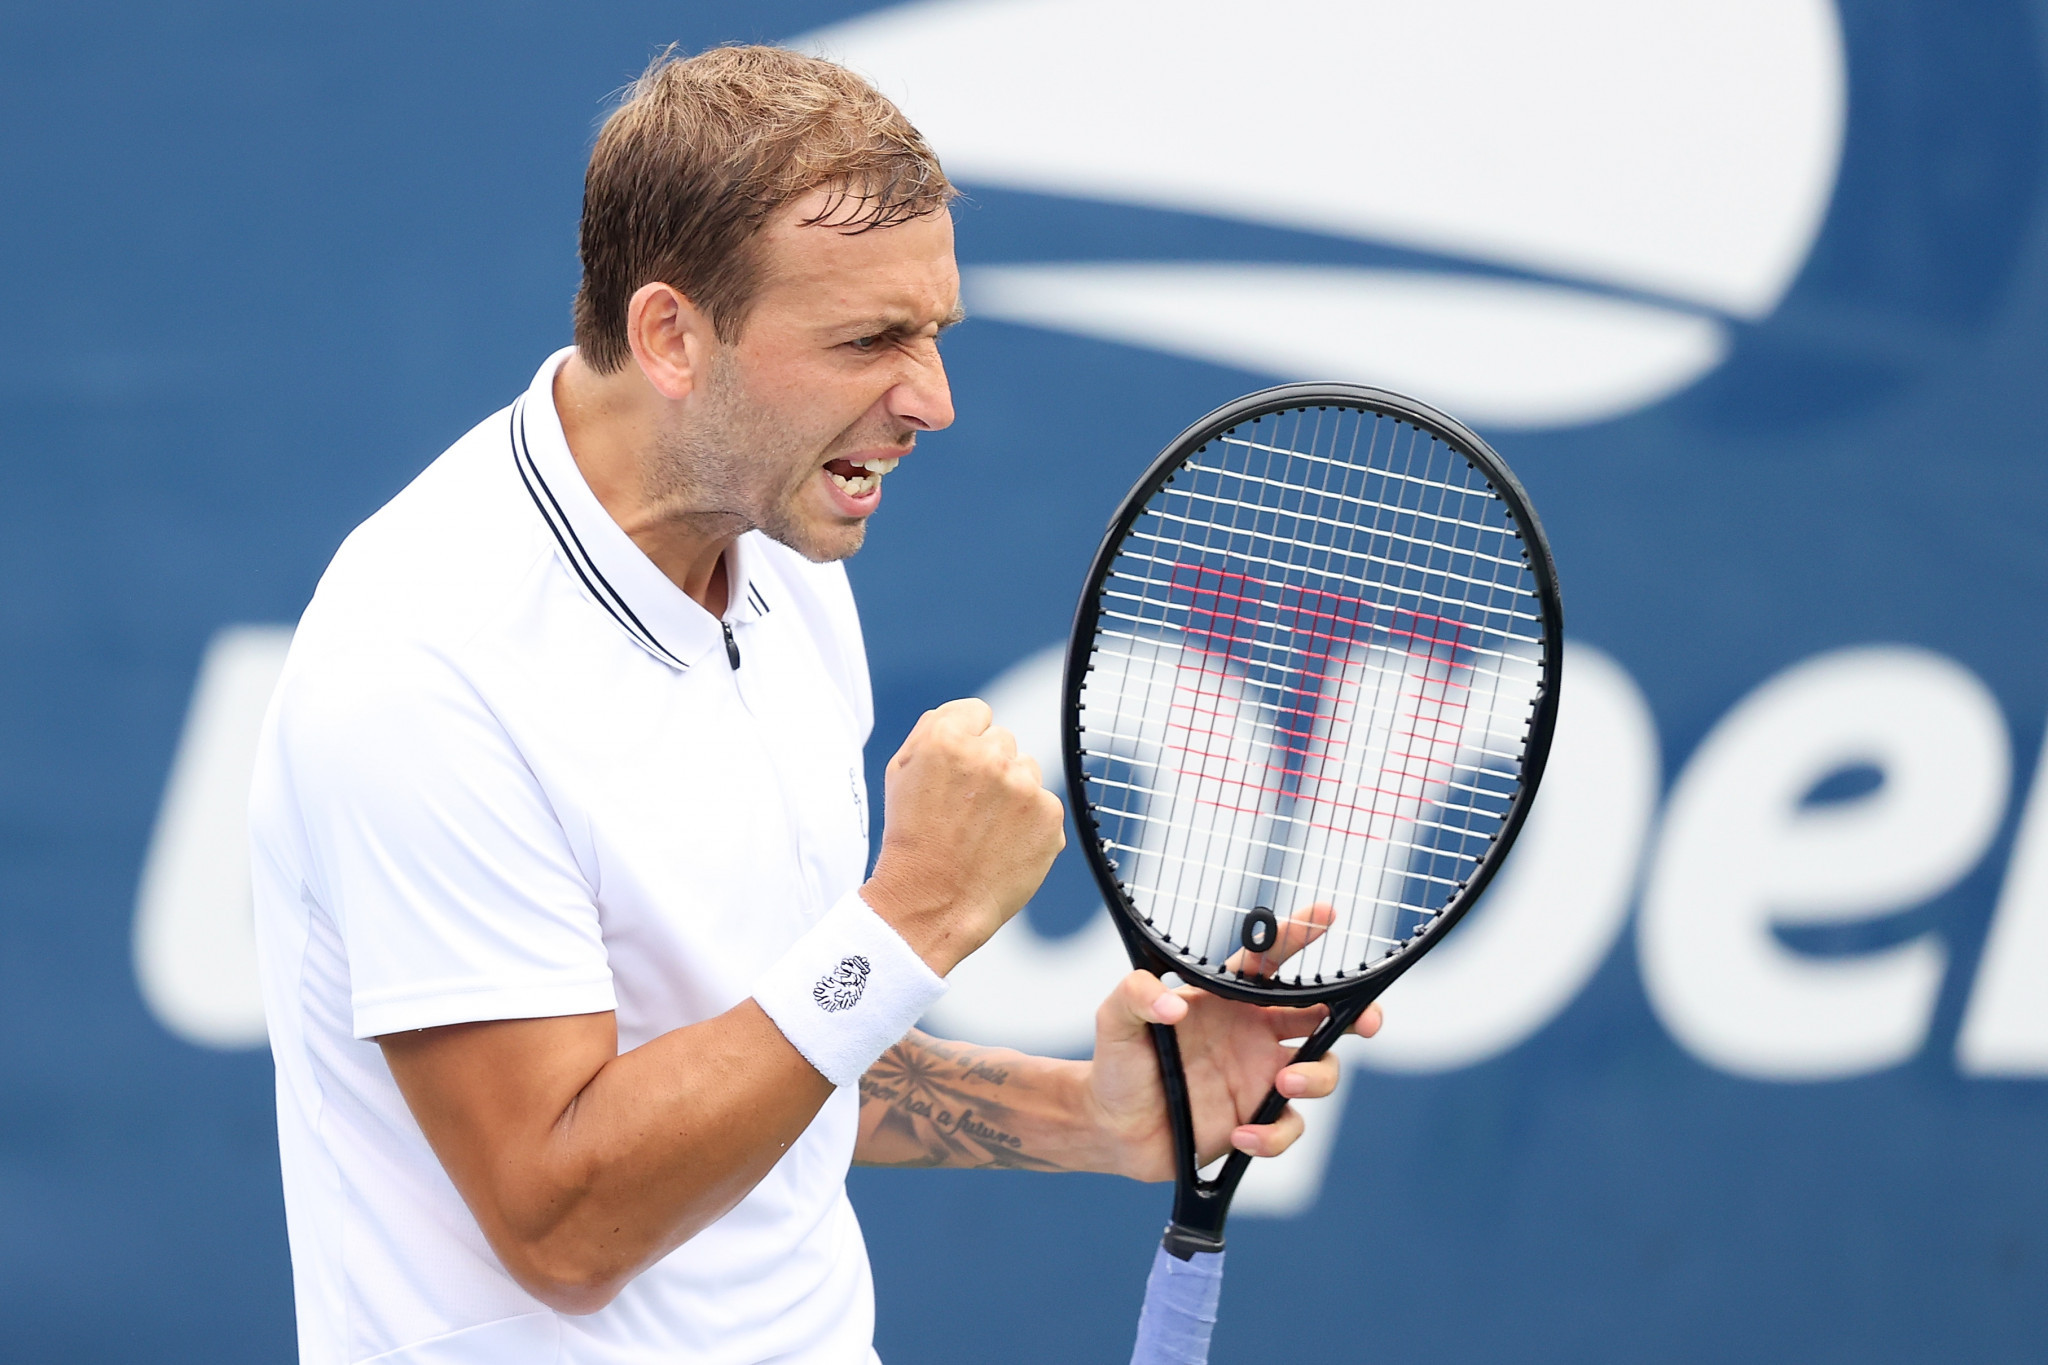 Dan Evans is Britain's last remaining men's player following Cameron Norrie and Andy Murray's eliminations ©Getty Images